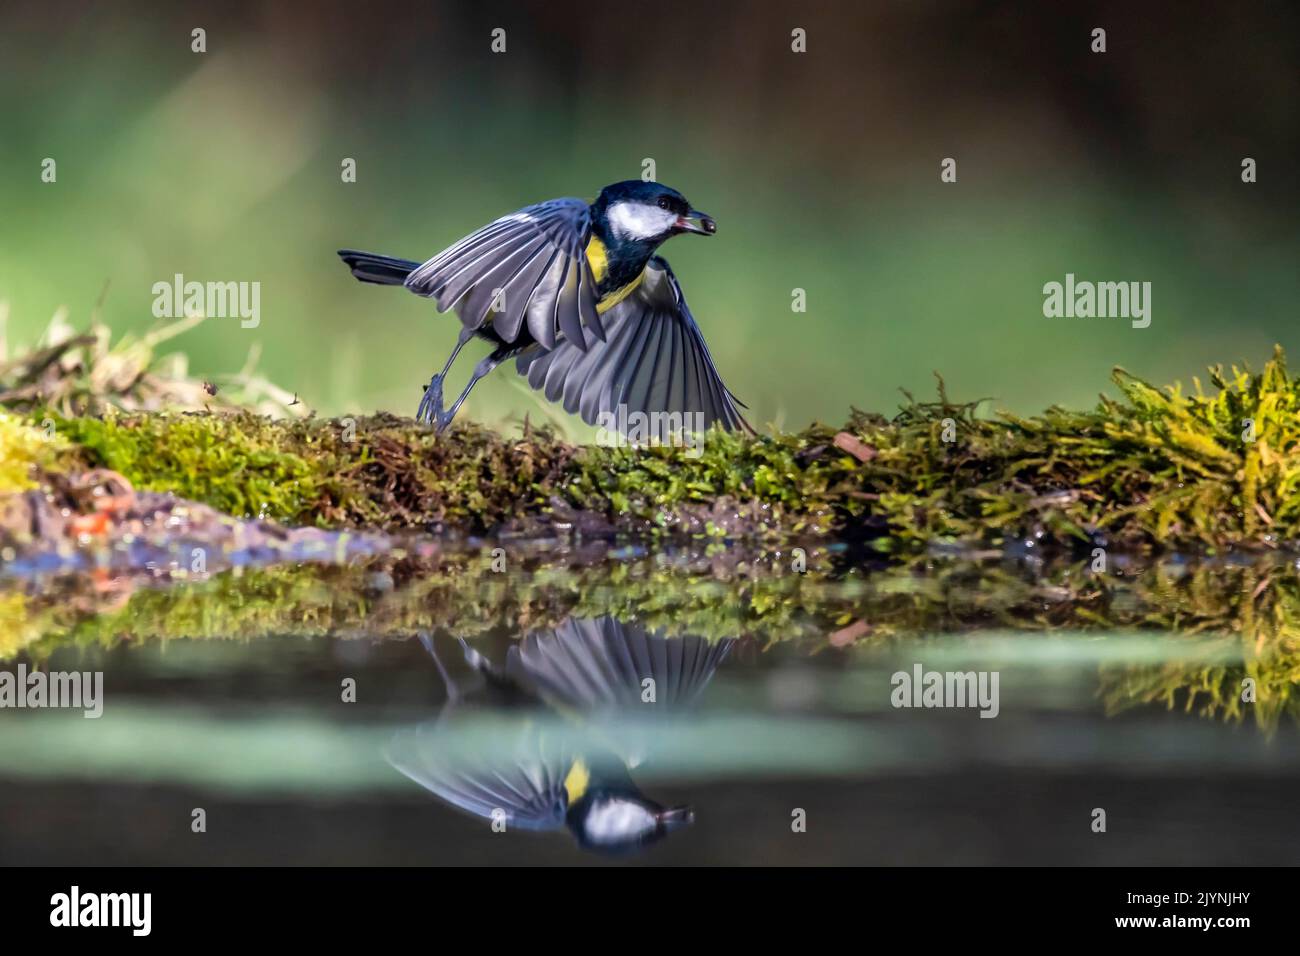 Great tit (Parus major) flying off the ground with a seed in its beak in winter, Glade on the edge of a forest, near Toul, Lorraine, France Stock Photo